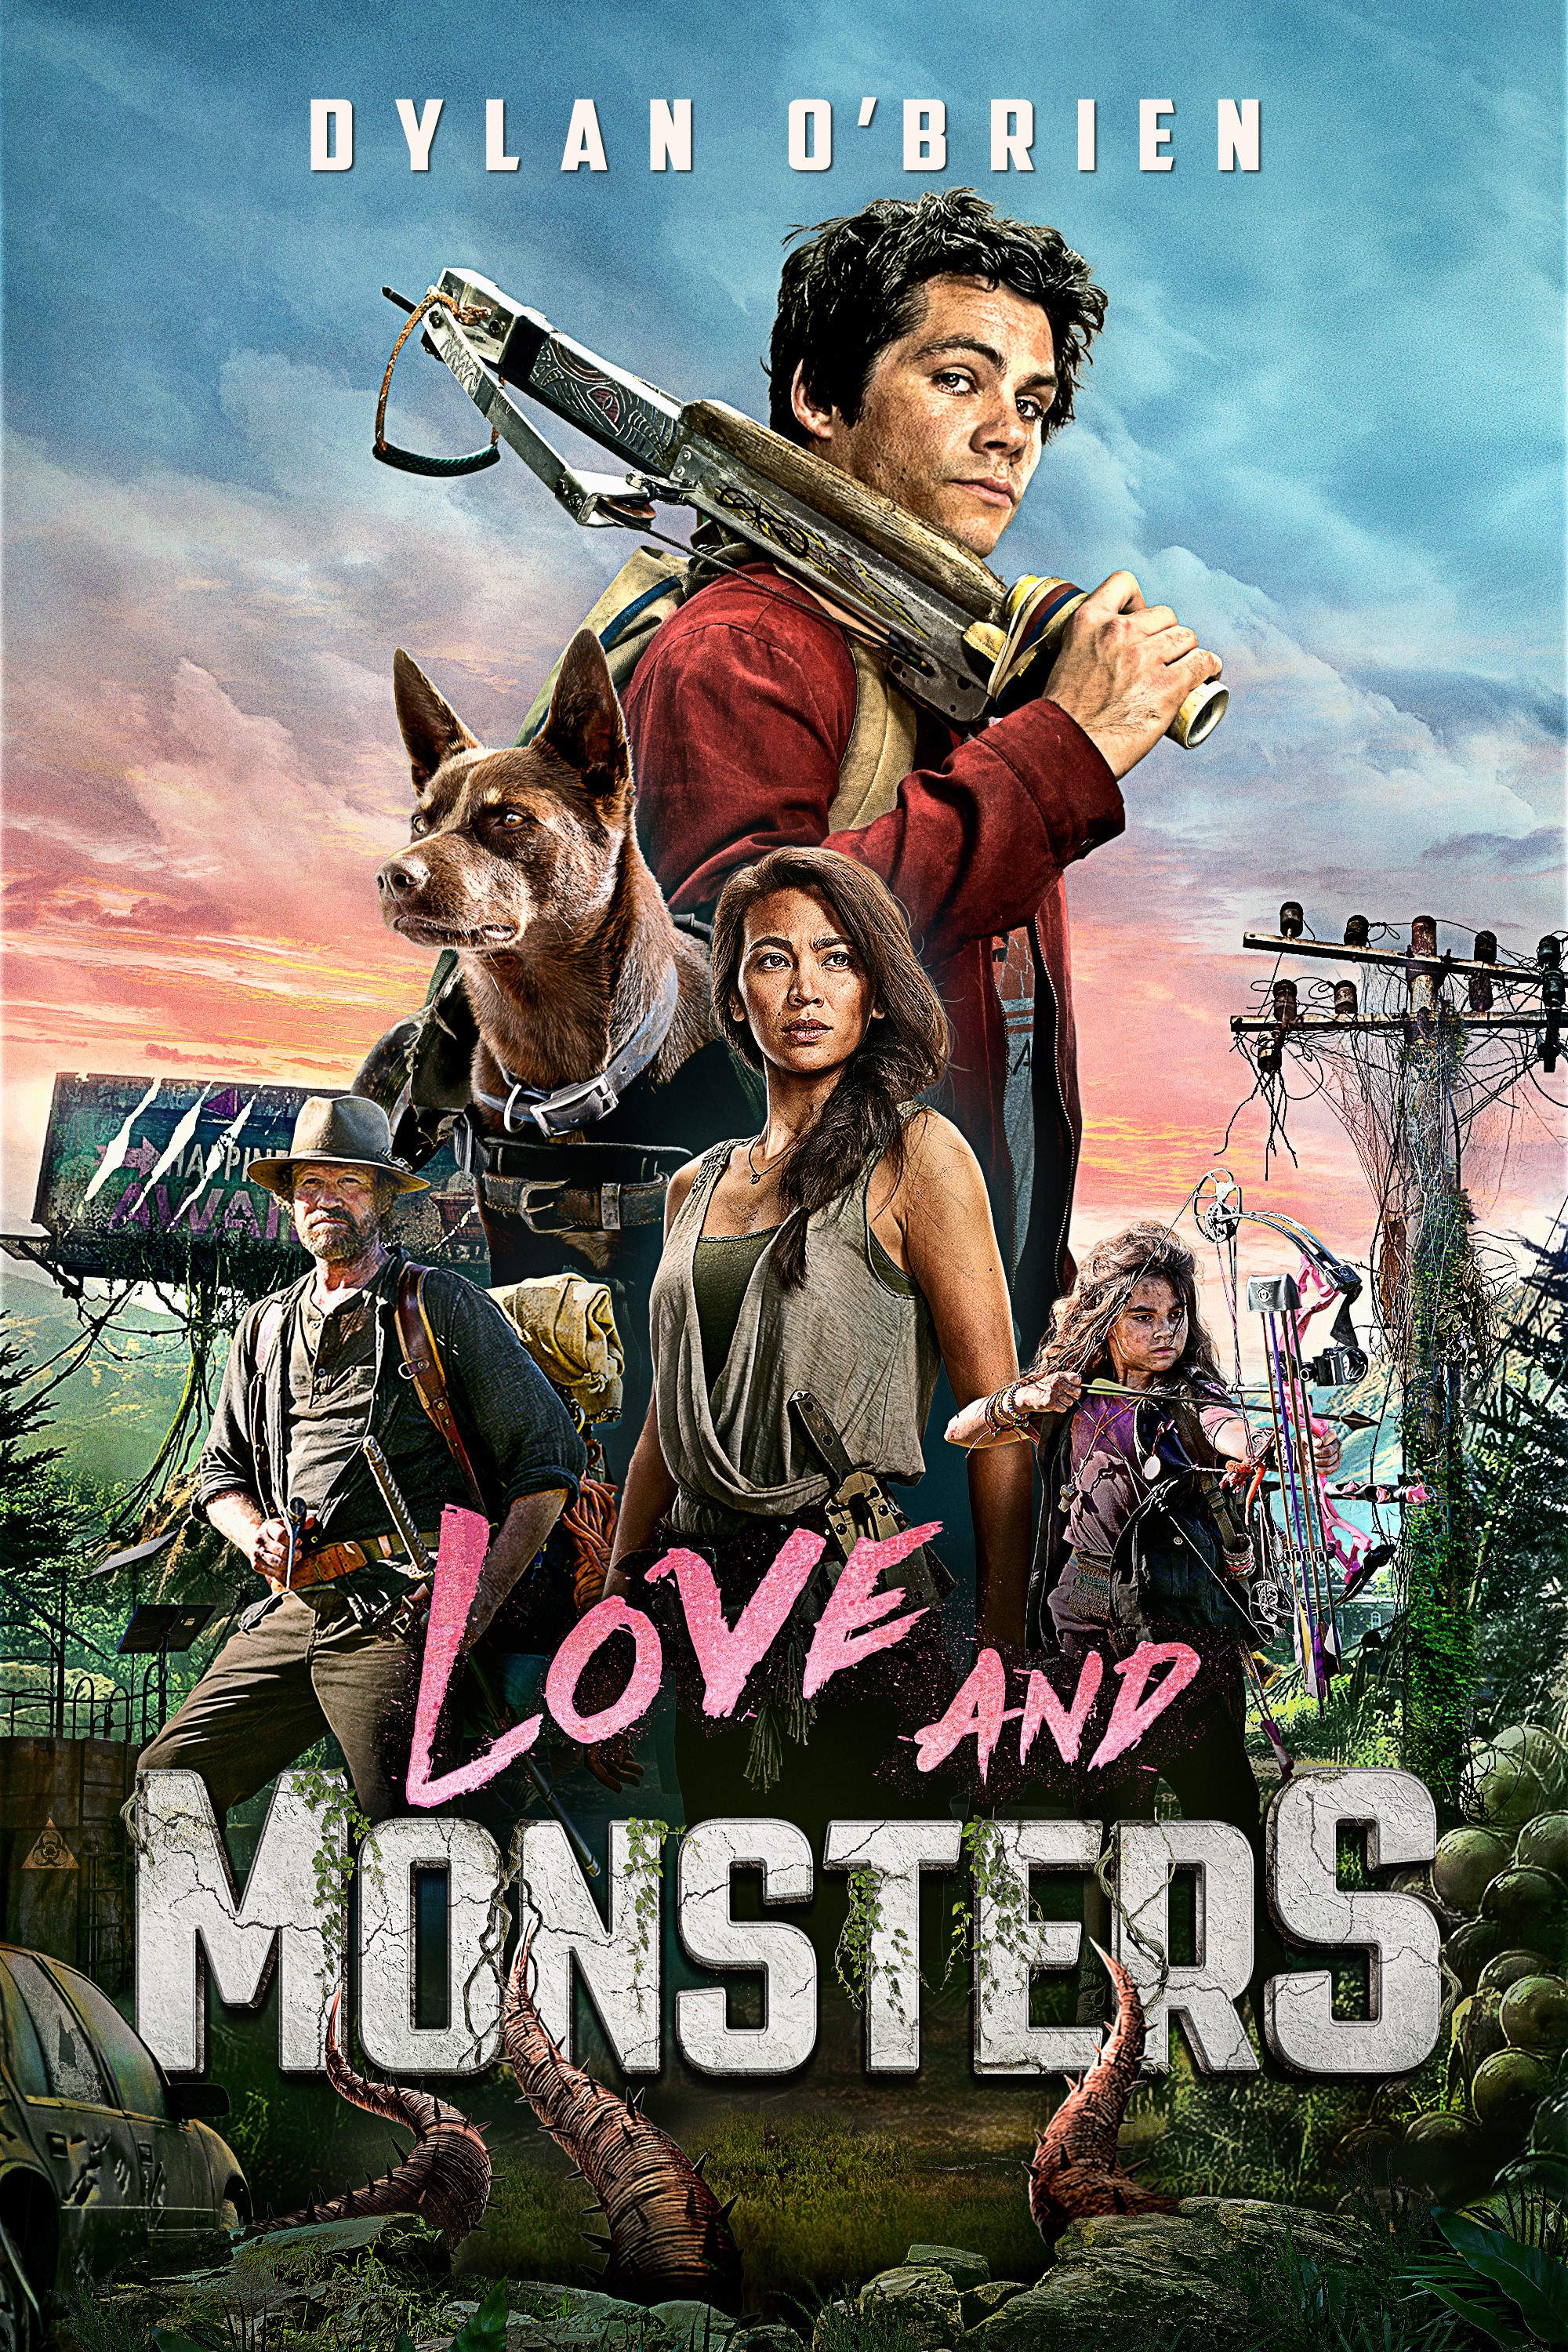 Love And Monsters 2020 Wallpapers